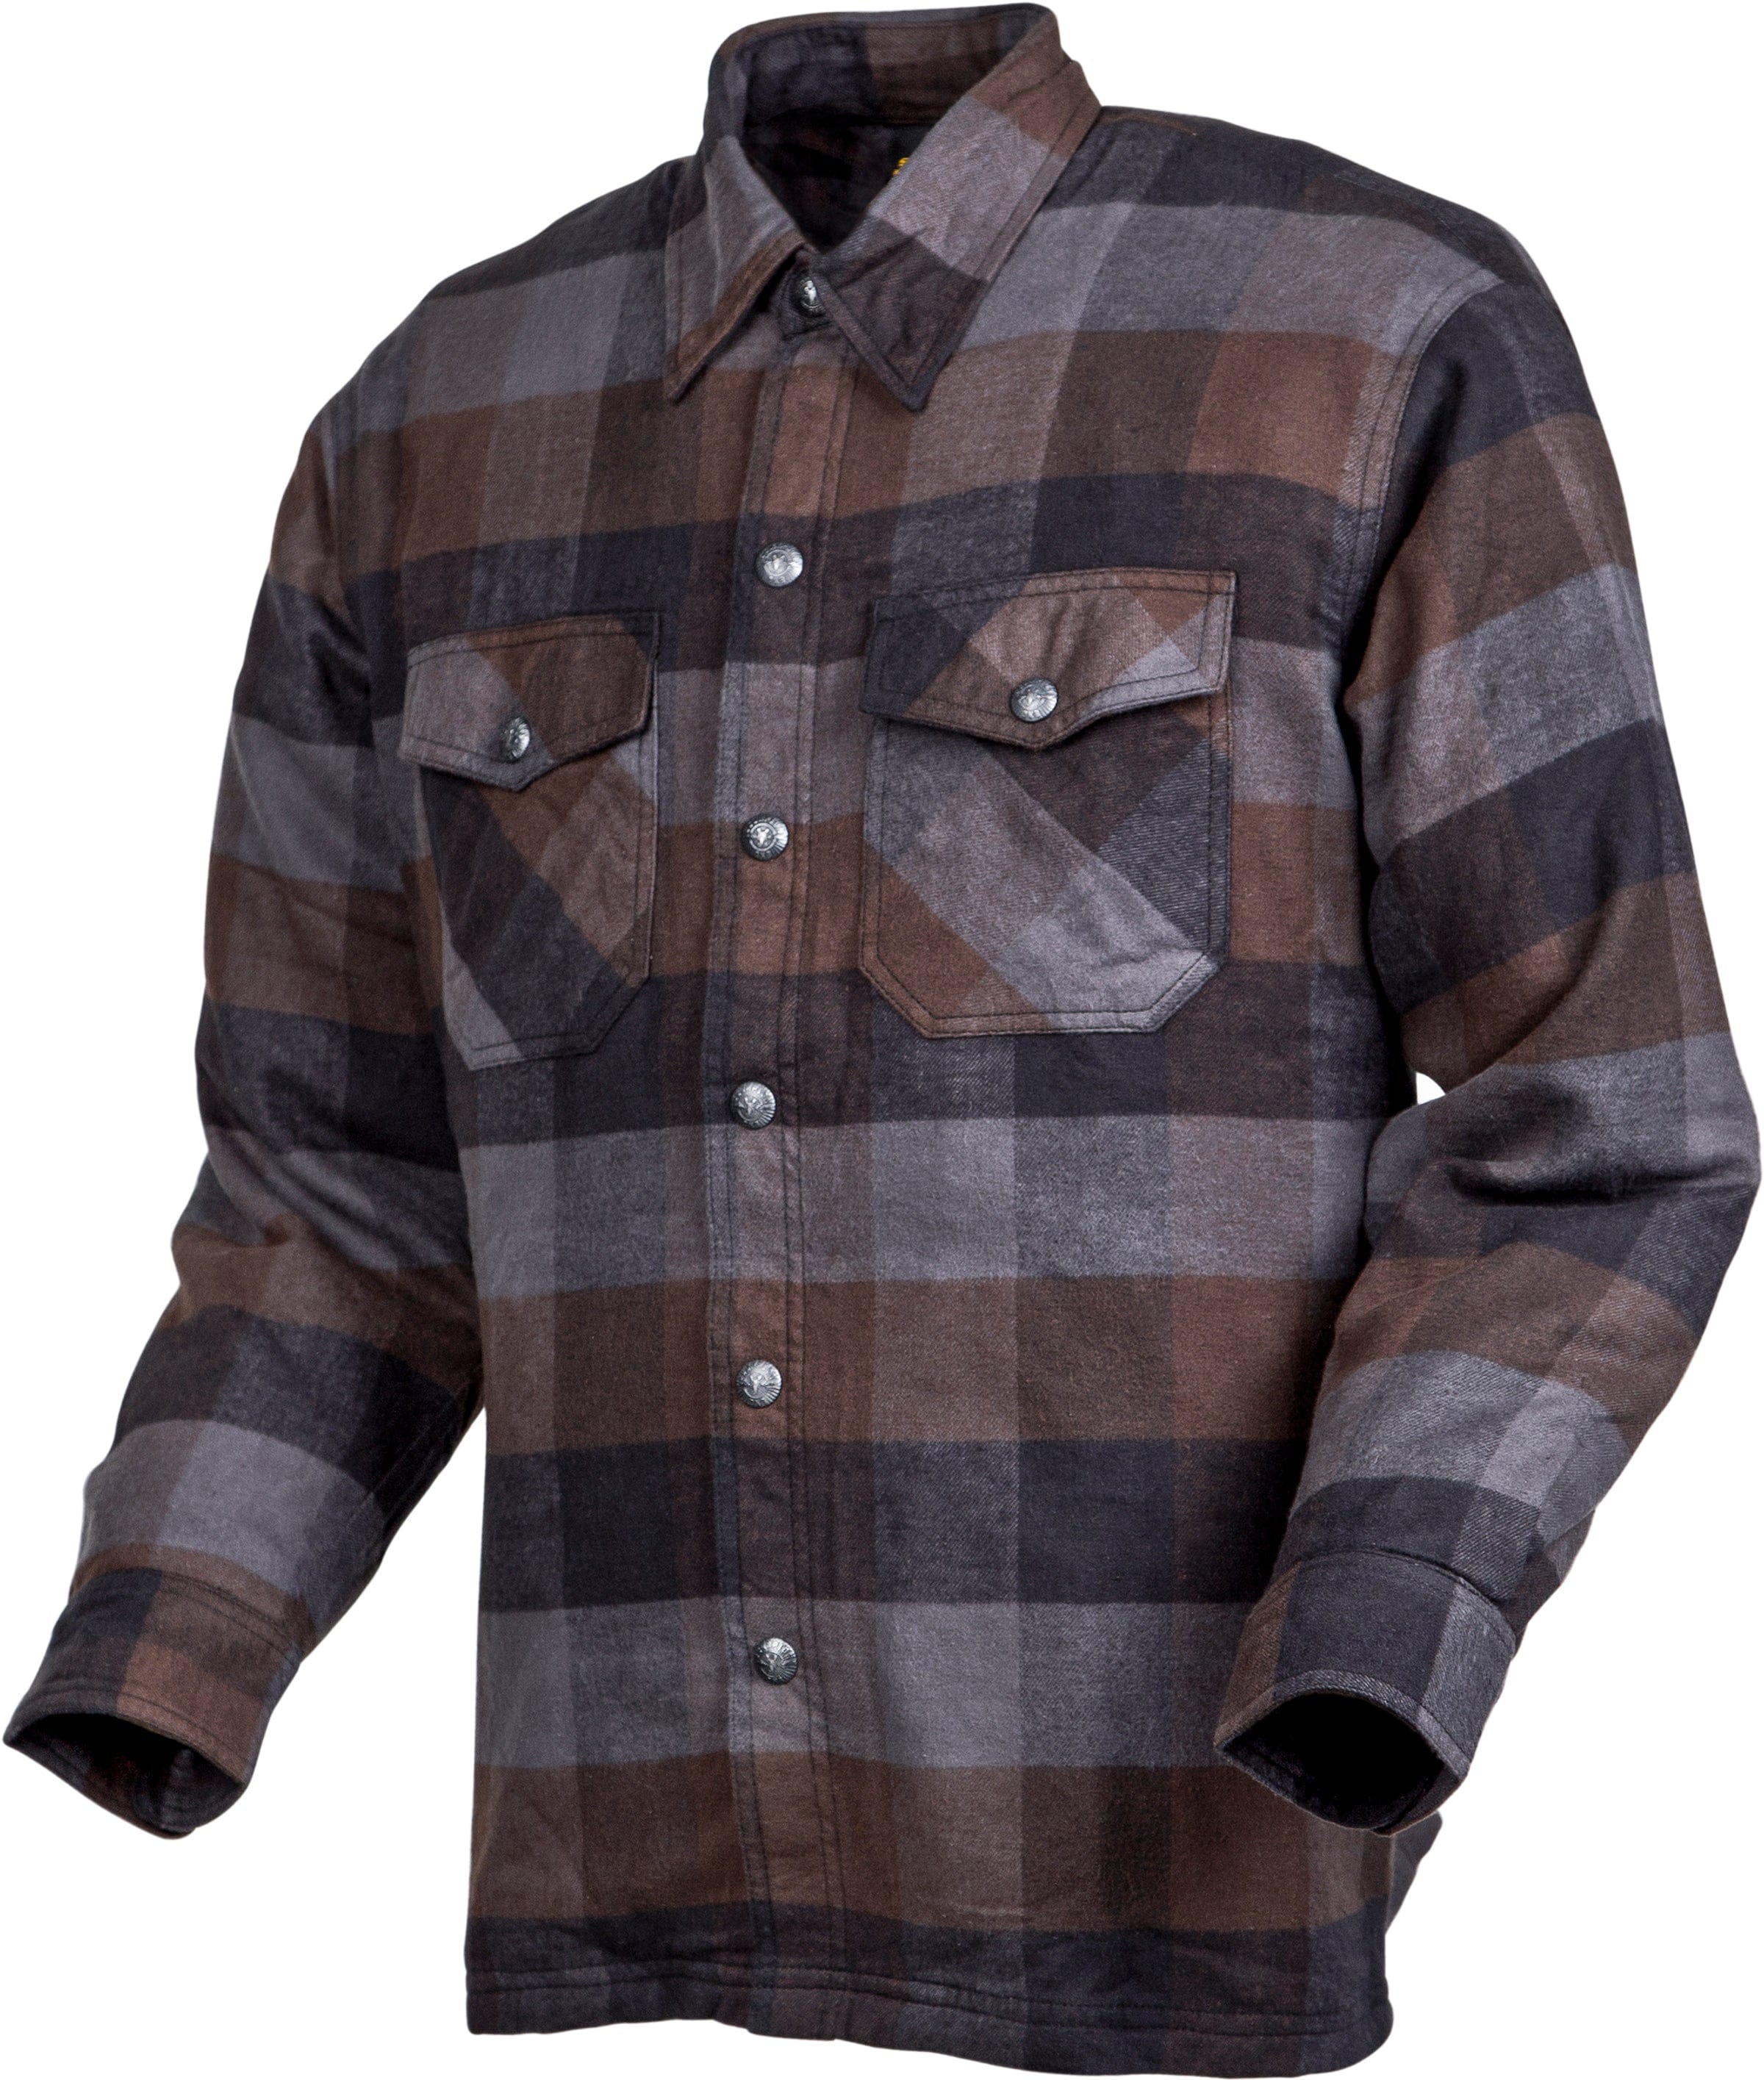 Western Powersports Flannel Shirt Black/Brown/Grey / 2X-Large Covert Moto Flannel by Scorpion Exo 13603-7